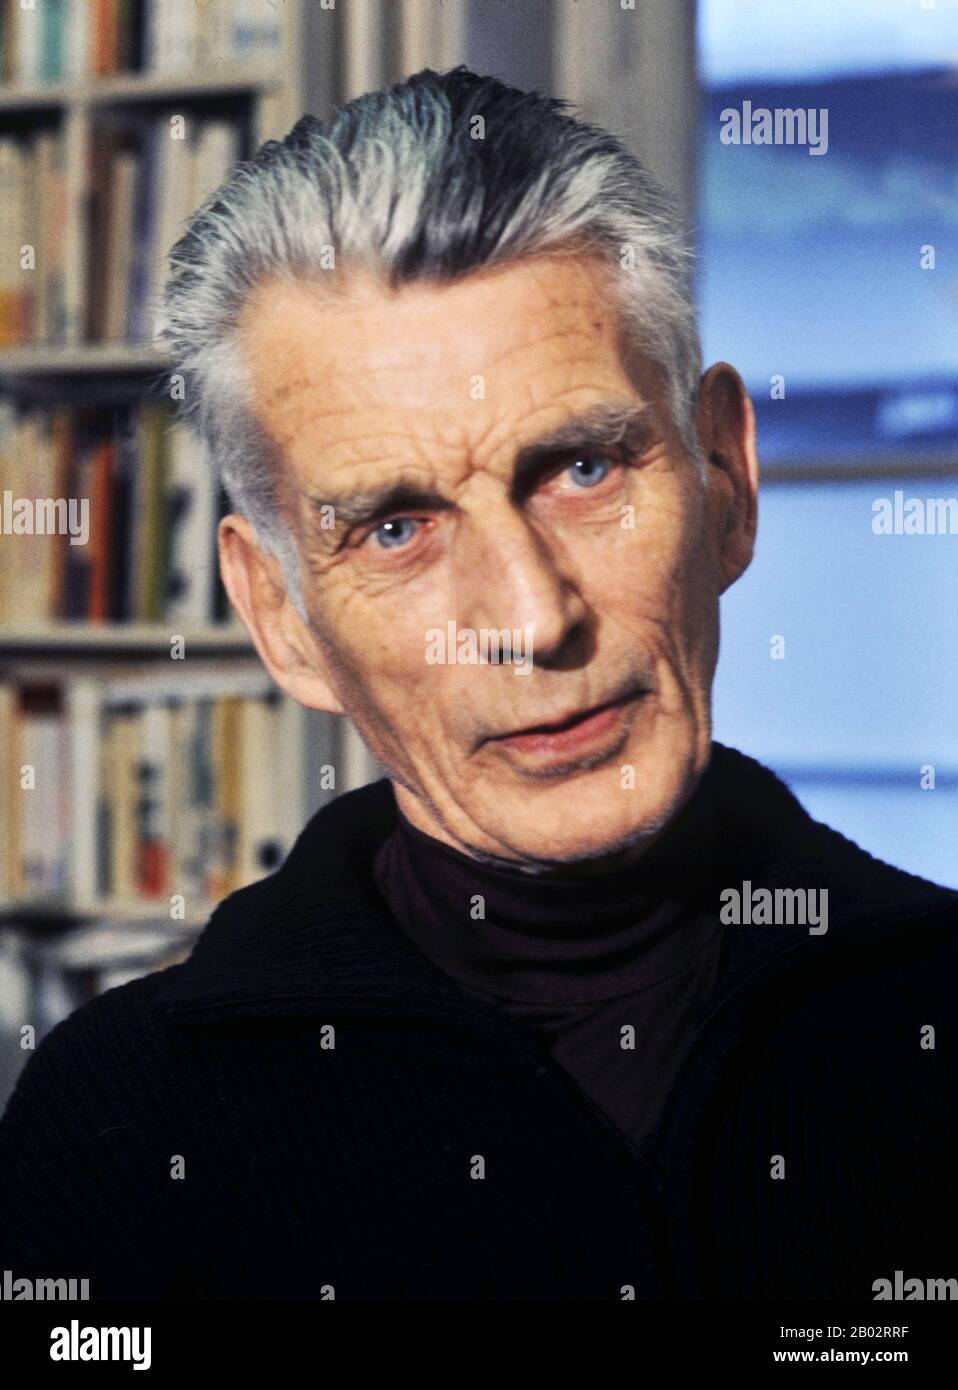 Samuel Barclay Beckett (13 April 1906 – 22 December 1989) was an Irish avant-garde novelist, playwright, theatre director, and poet, who lived in Paris for most of his adult life and wrote in both English and French. His work offers a bleak, tragicomic outlook on human nature, often coupled with black comedy and gallows humour.  Beckett is widely regarded as among the most influential writers of the 20th century. He is considered one of the last modernists. As an inspiration to many later writers, he is also sometimes considered one of the first postmodernists.  Beckett was awarded the 1969 No Stock Photo